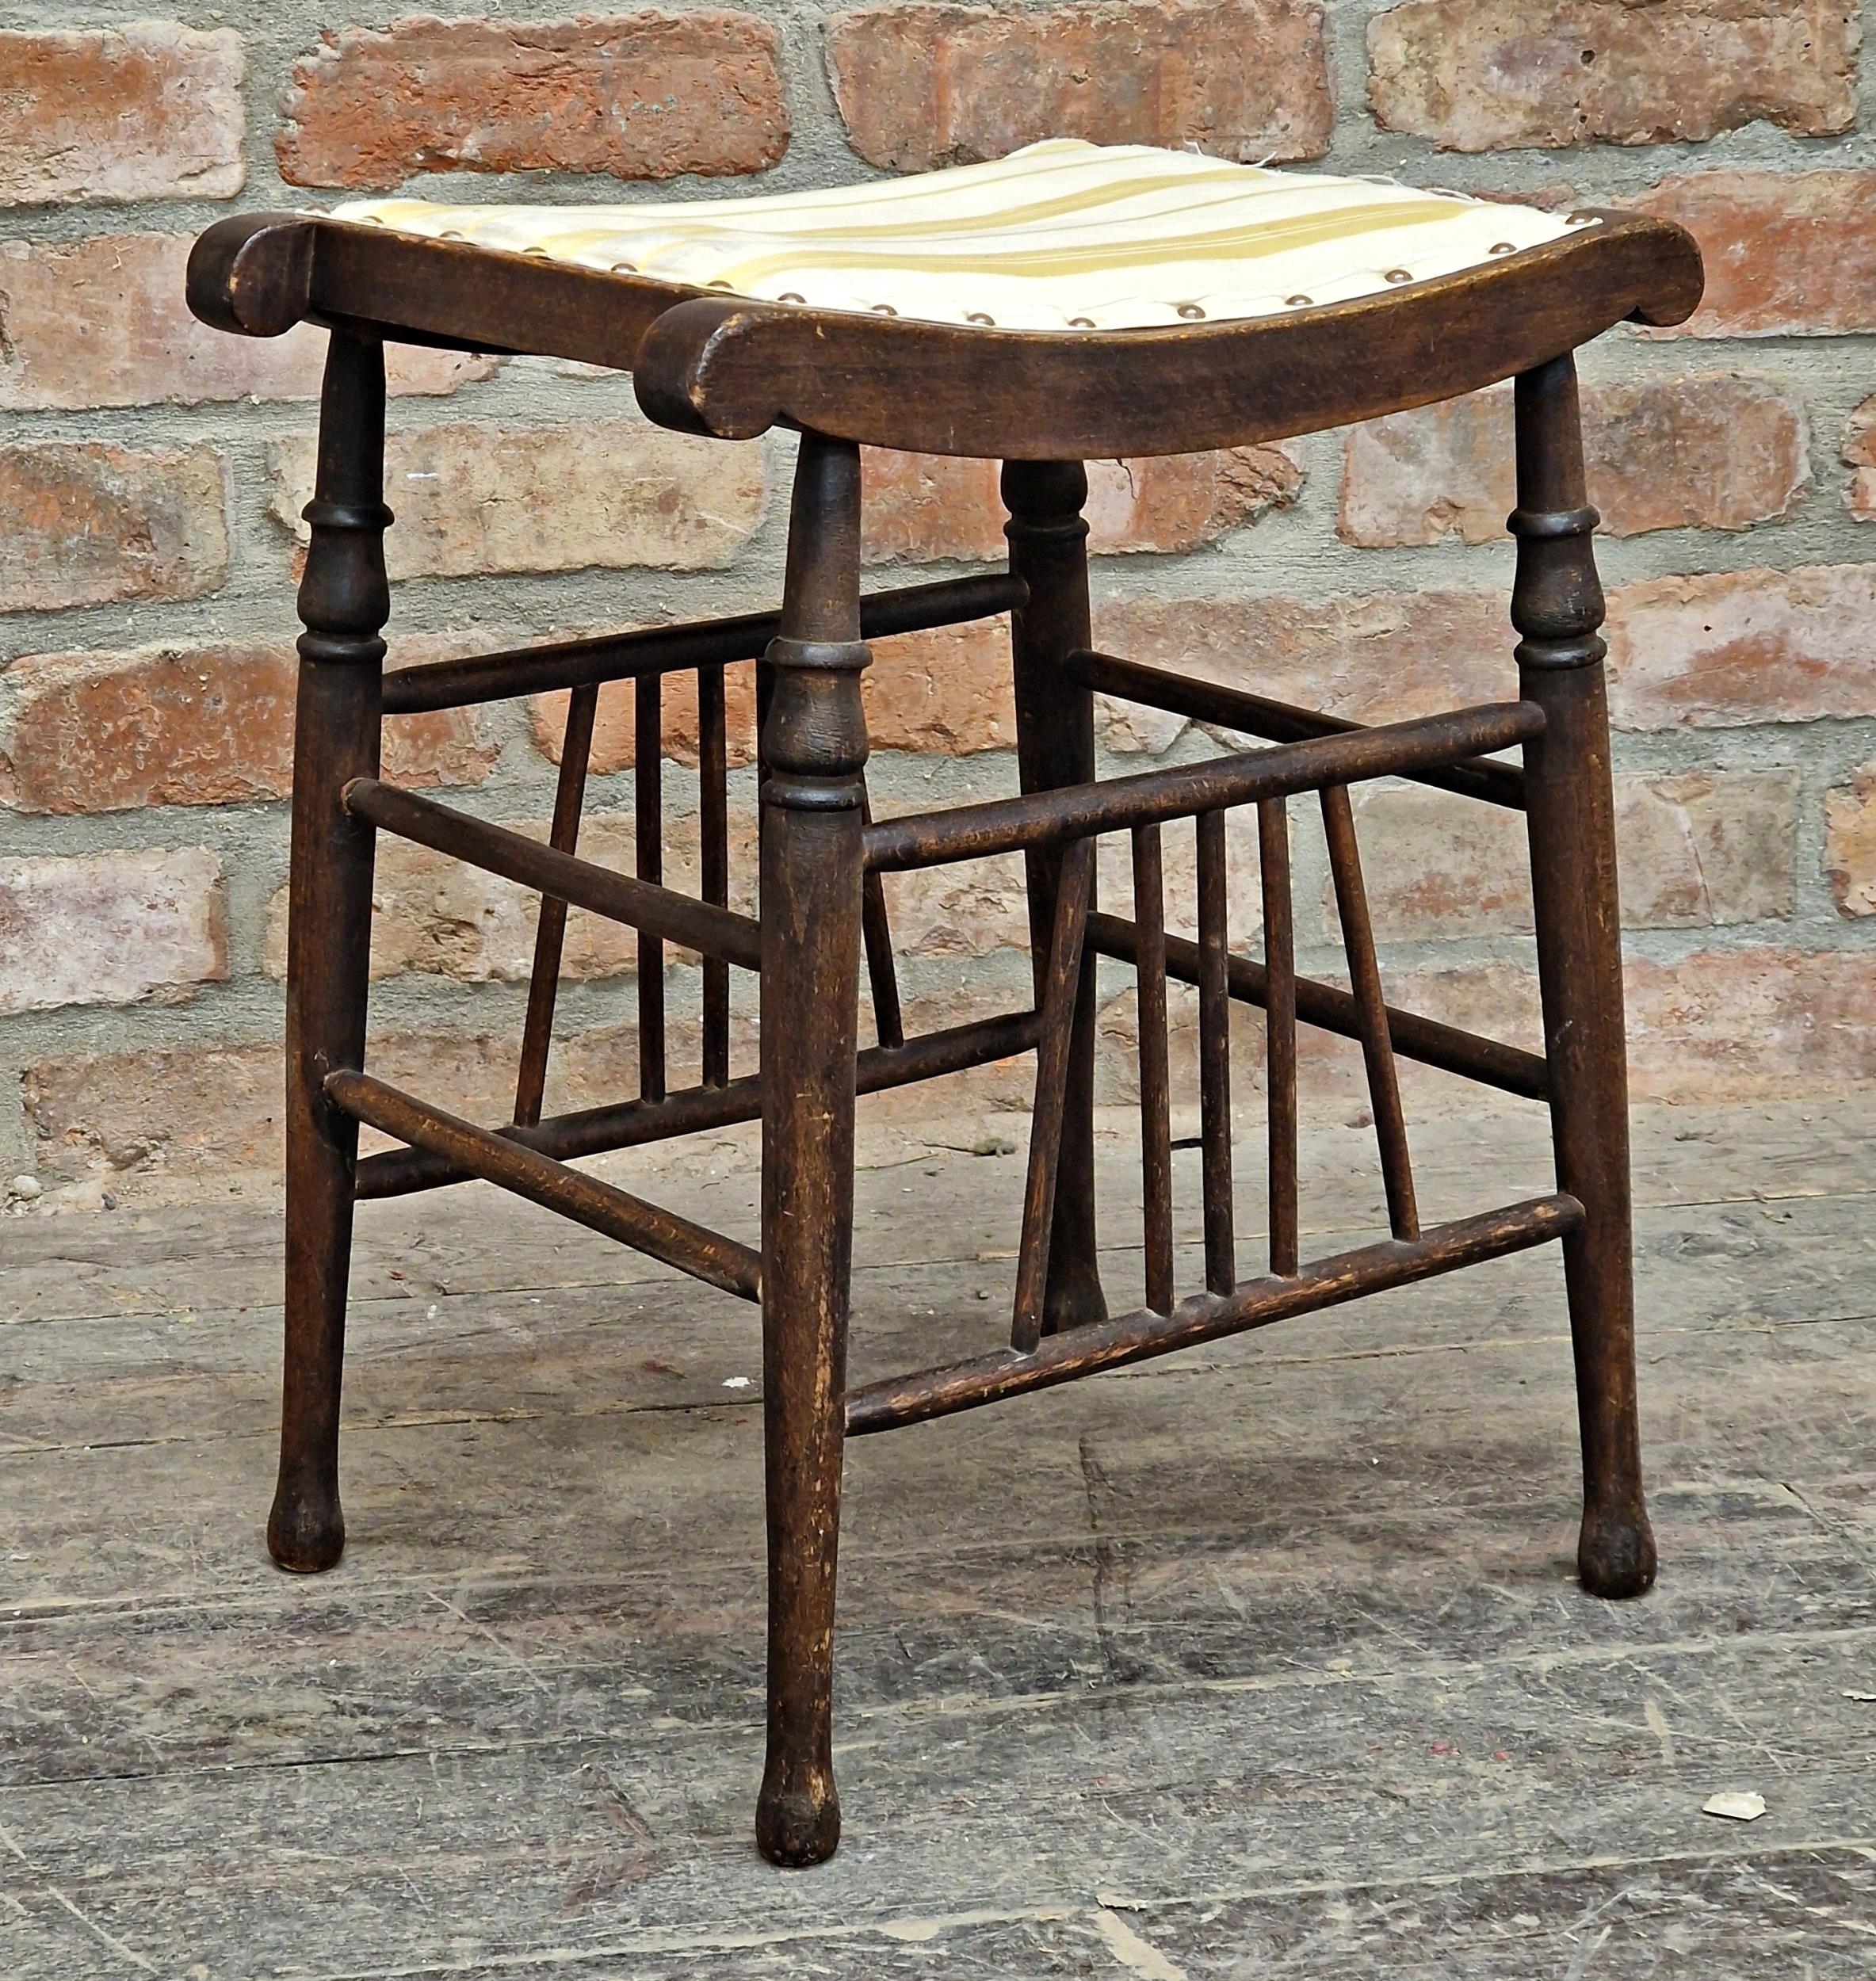 Antique Thebes style stool with studded fabric top raised on turned and tapered supports, H 51cm x W